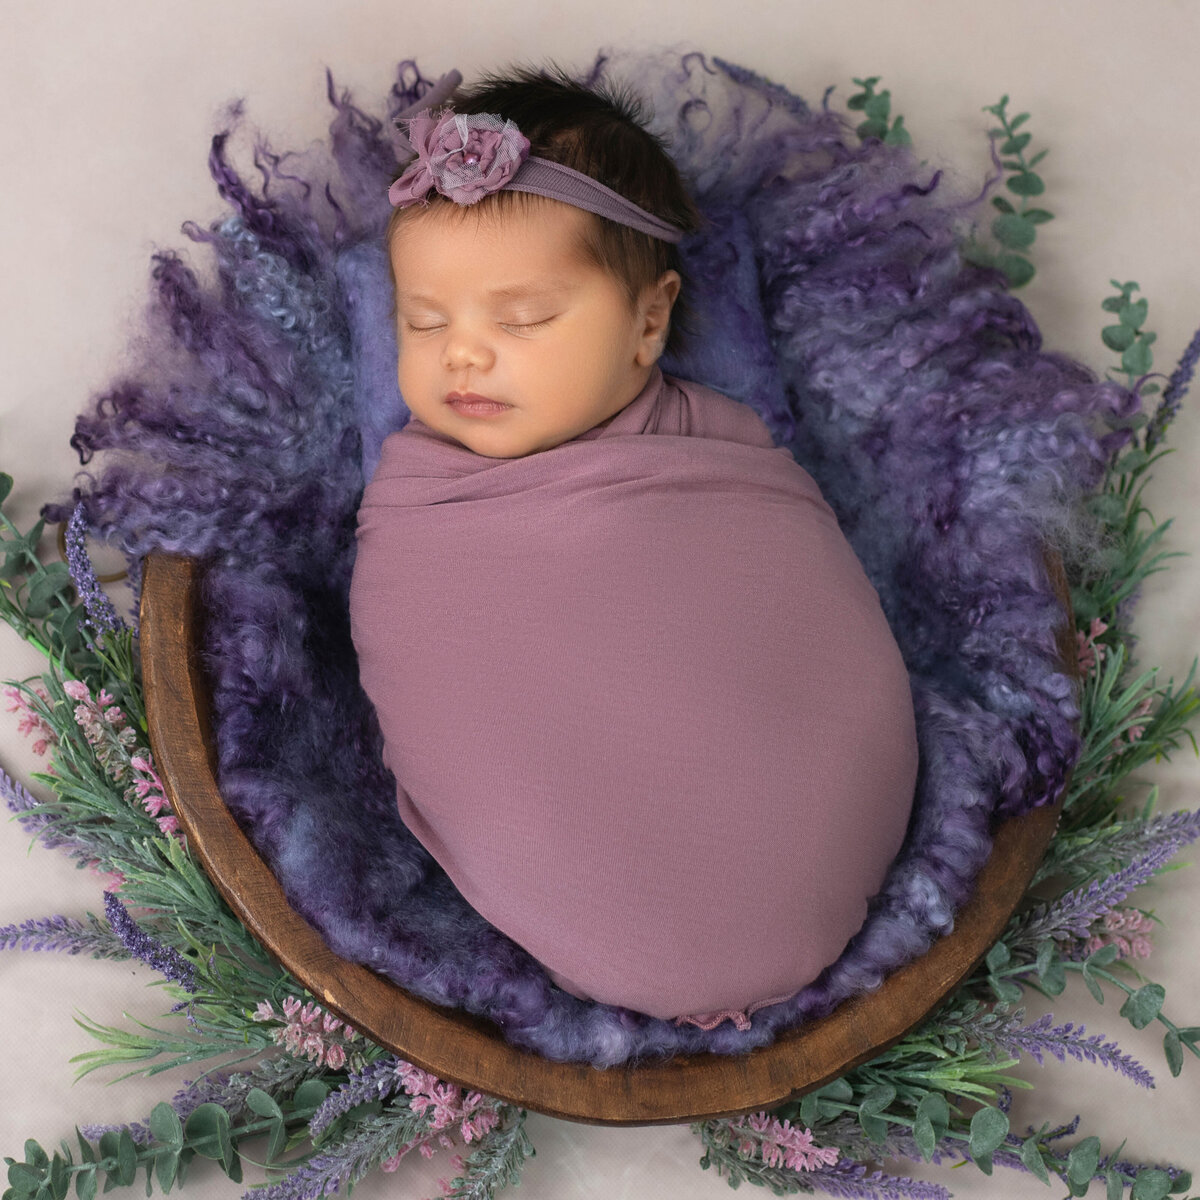 newborn girl in purple wrap surrounded by flowers